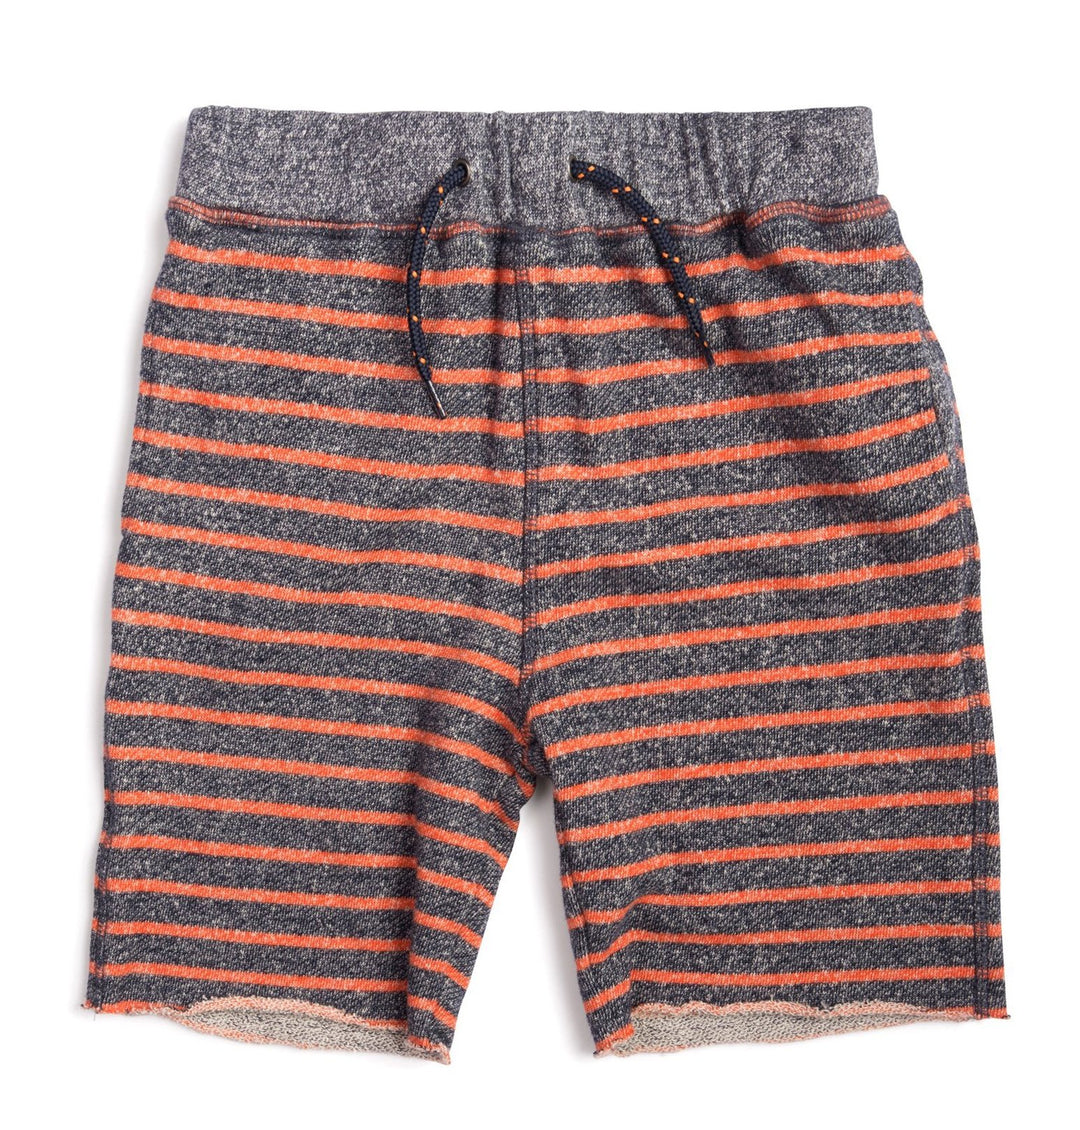 Appman camp short orange and charcoal